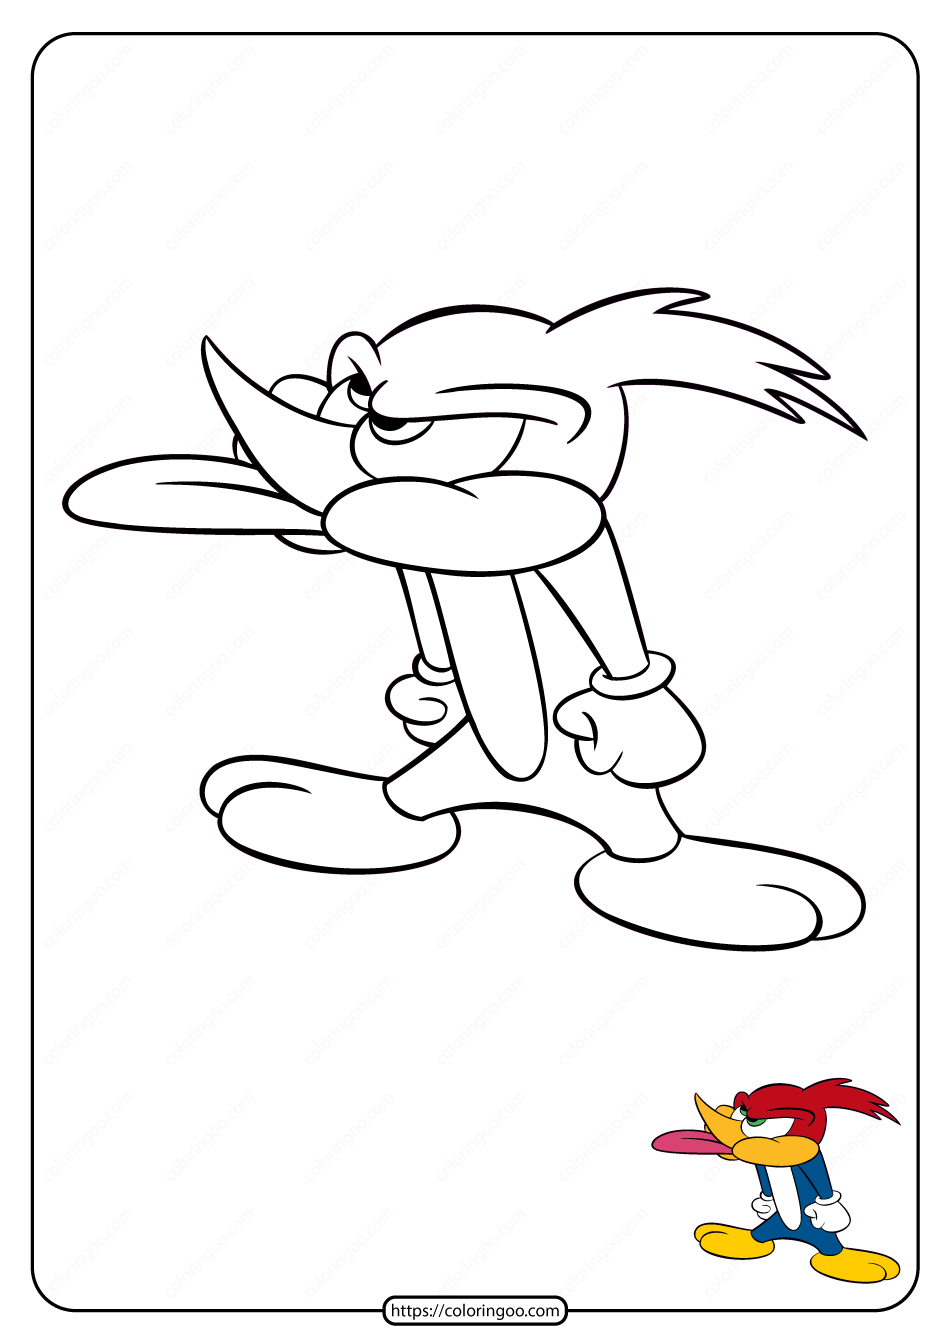 Woody Woodpecker Sticks Out Tongue Coloring Page